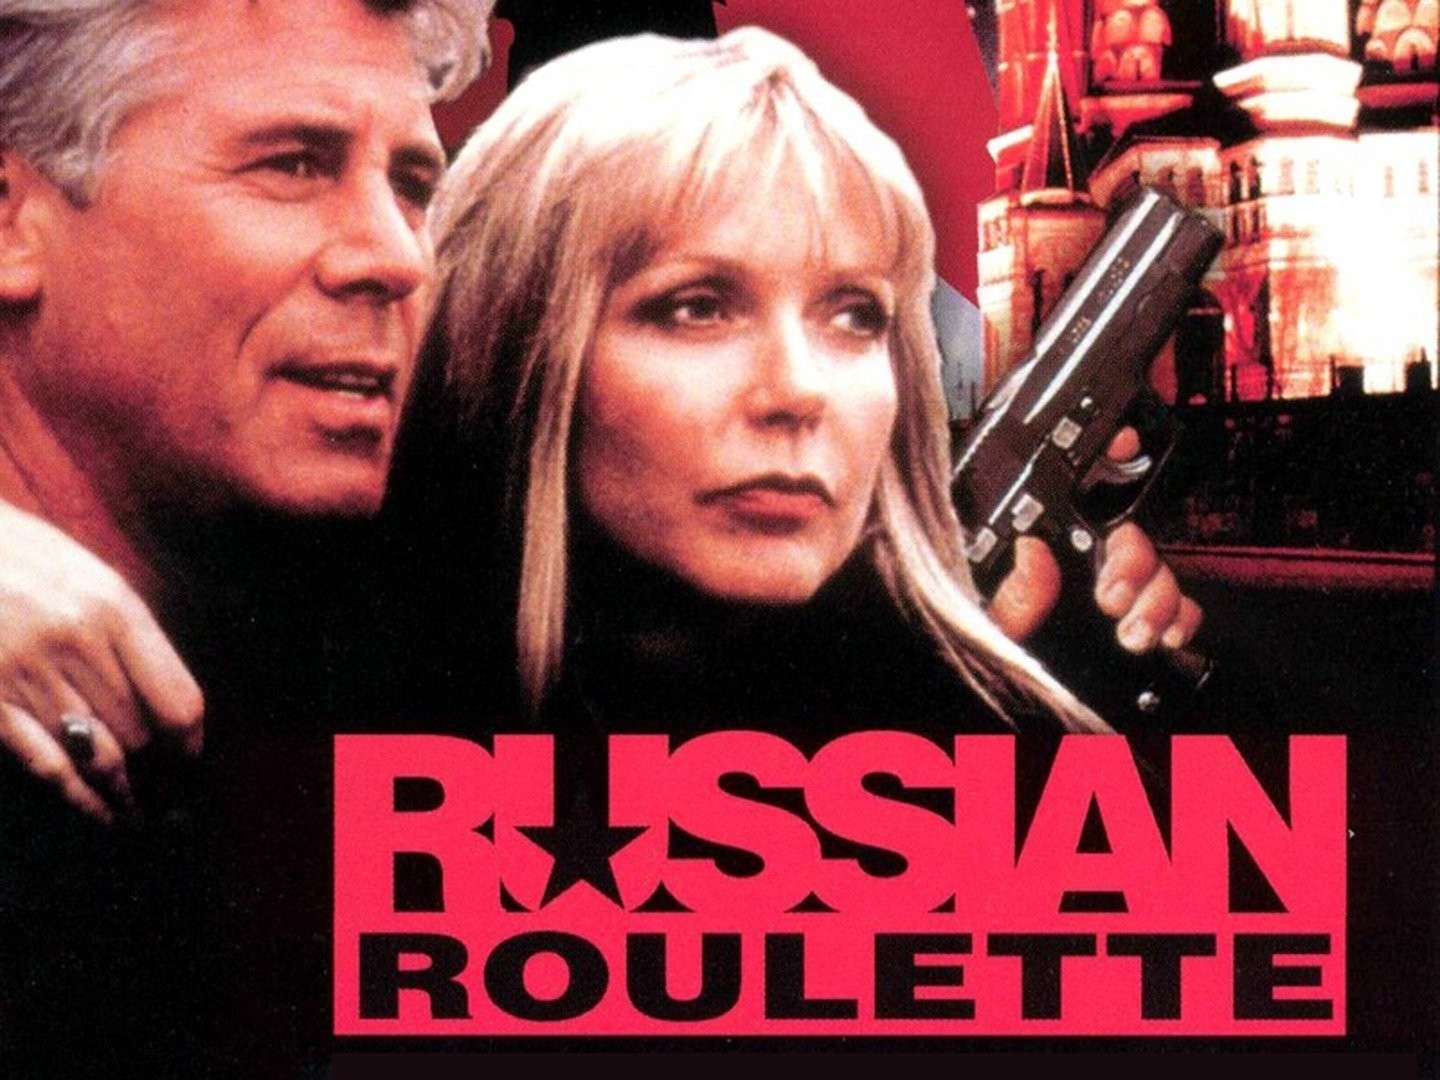 Russian Roulette - Plugged In